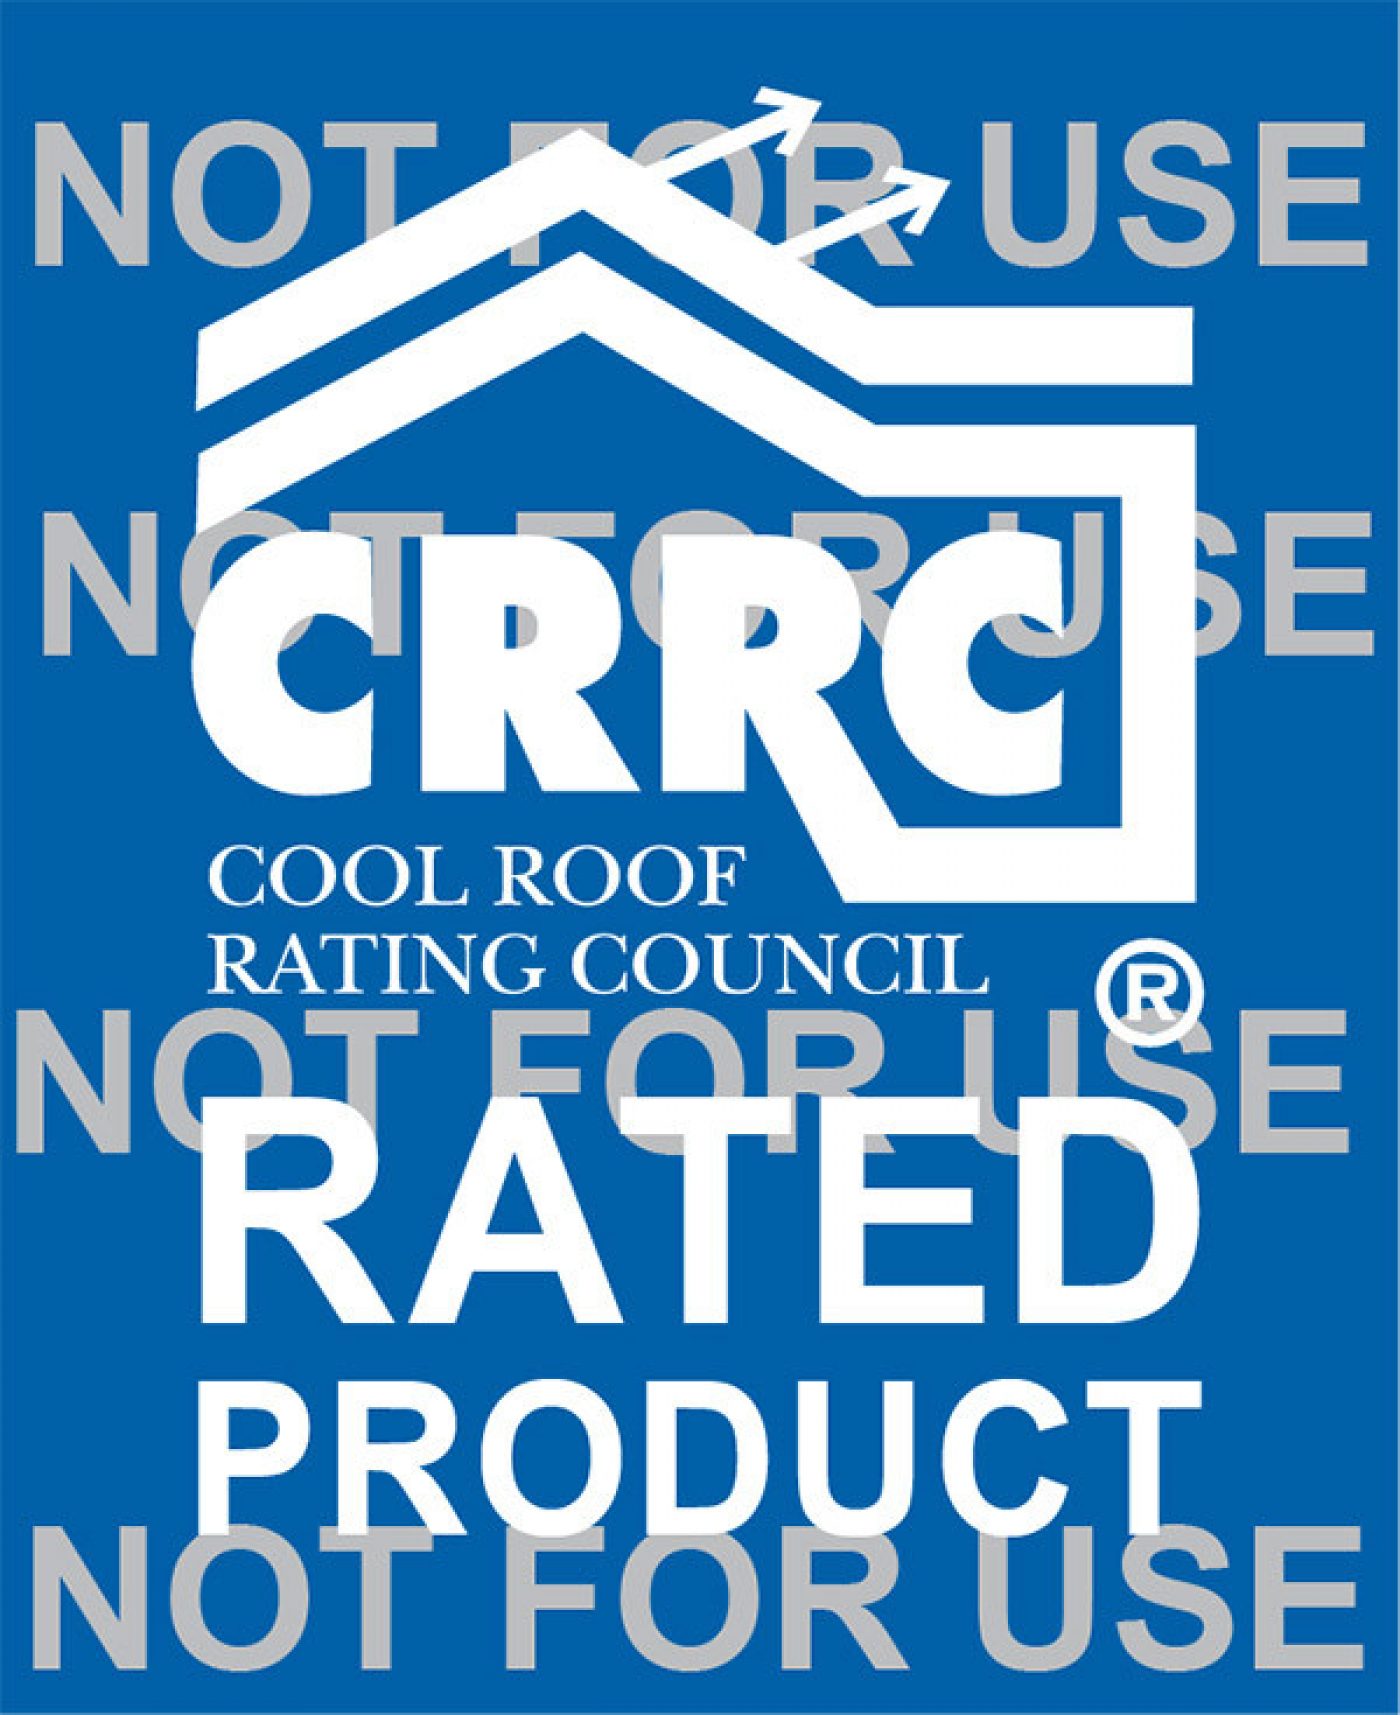 CRRC rated product